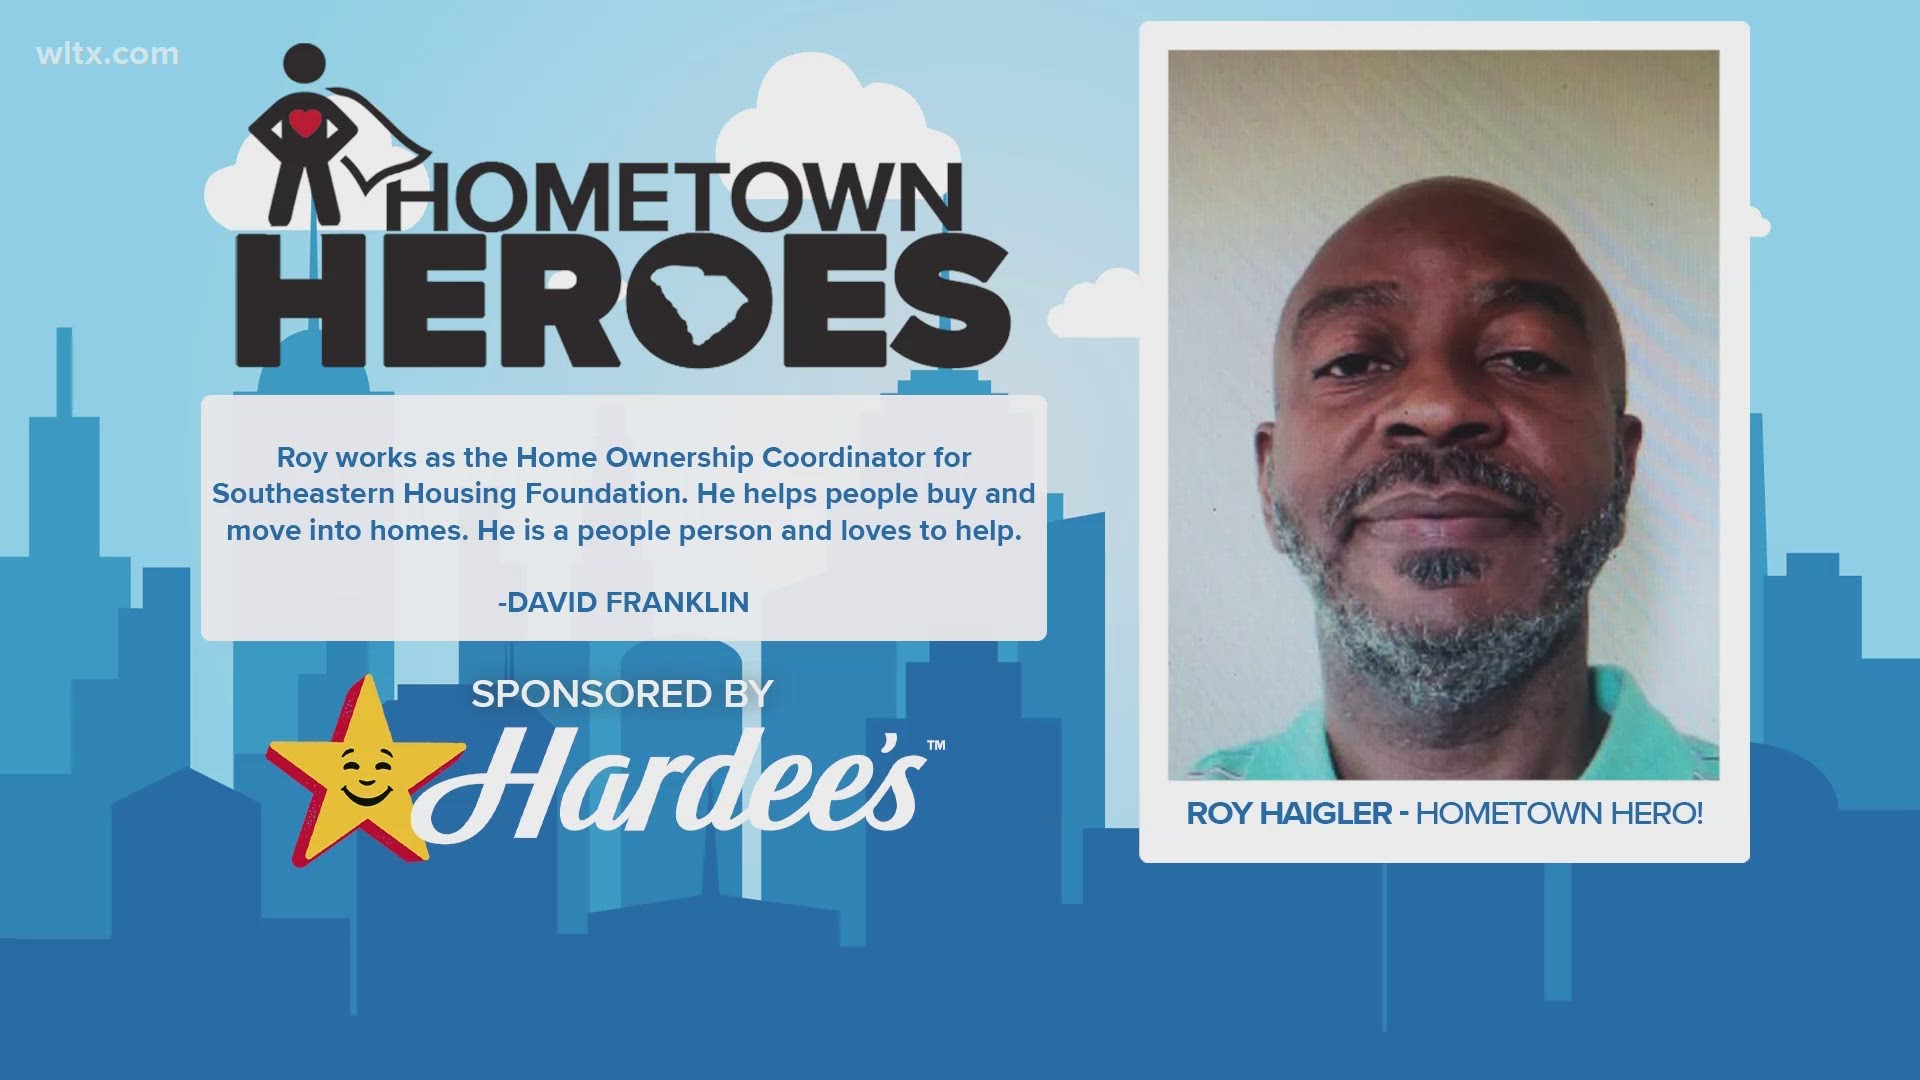 Roy currently works as the home ownership coordinator for Southeastern Housing Foundation. In doing so he helps people buy and move into homes.